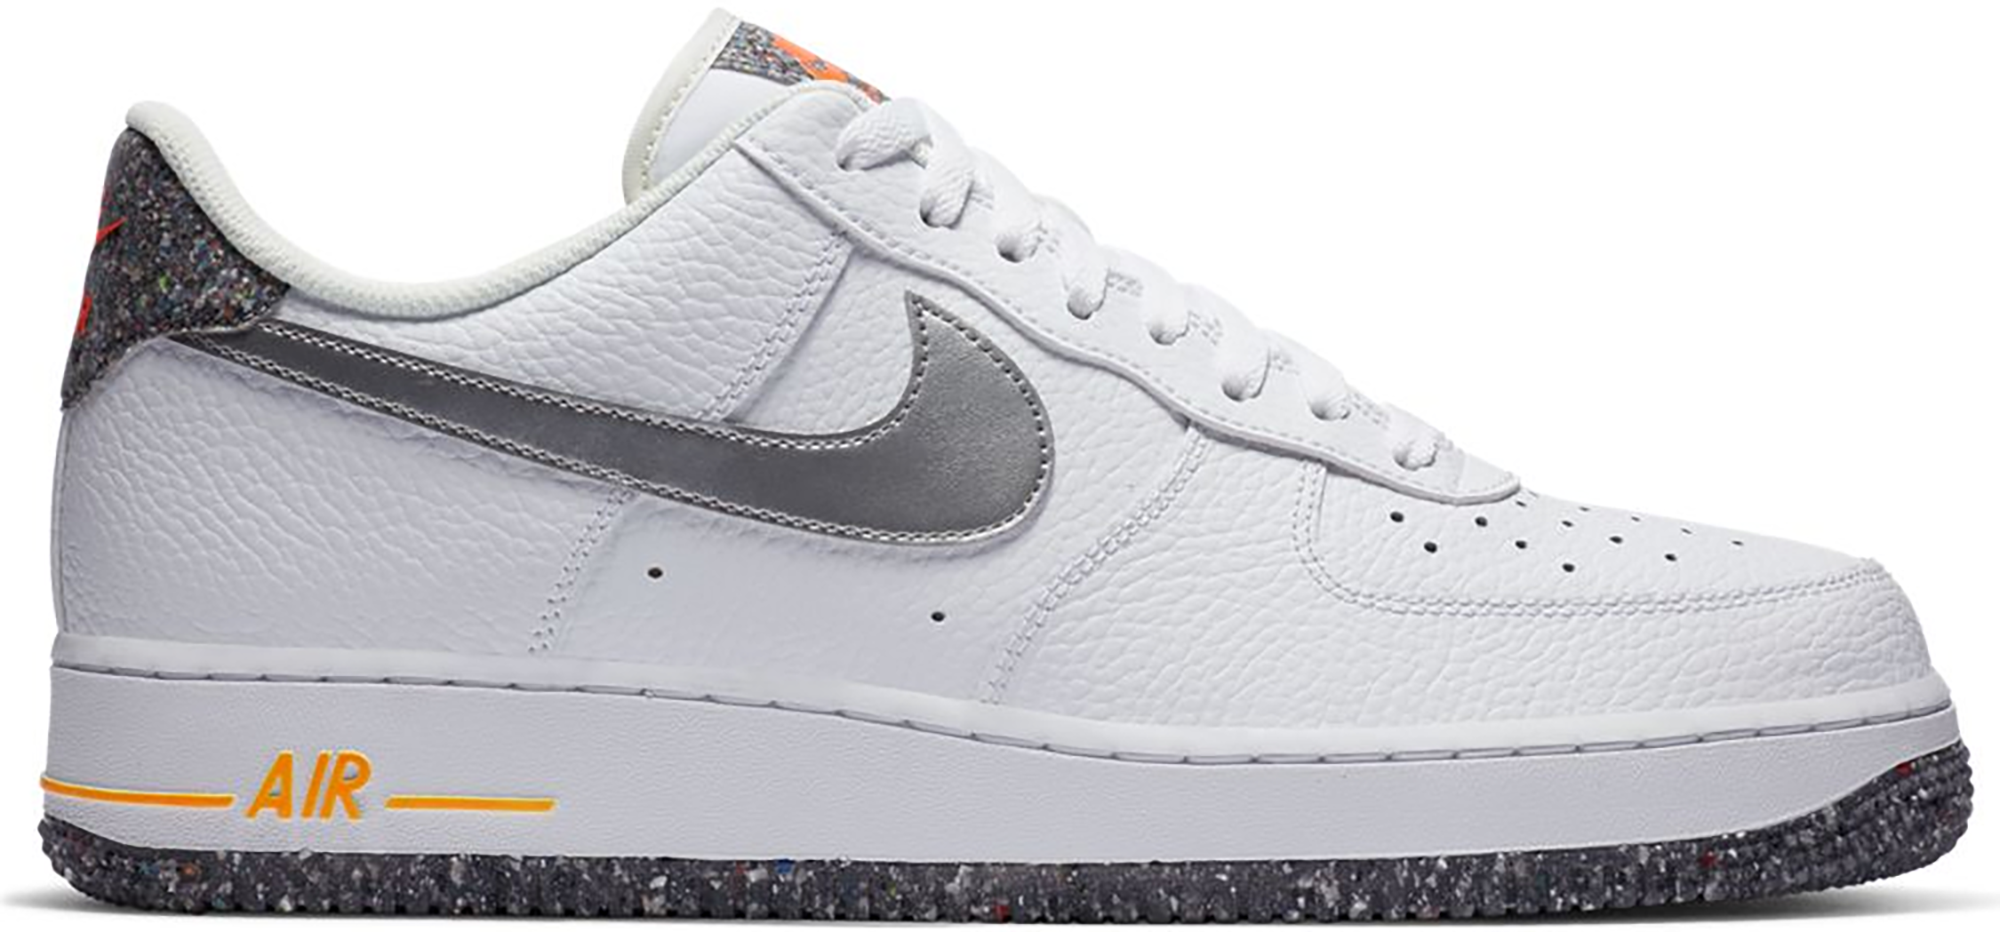 Nike Air Force 1 Crater Grind White 